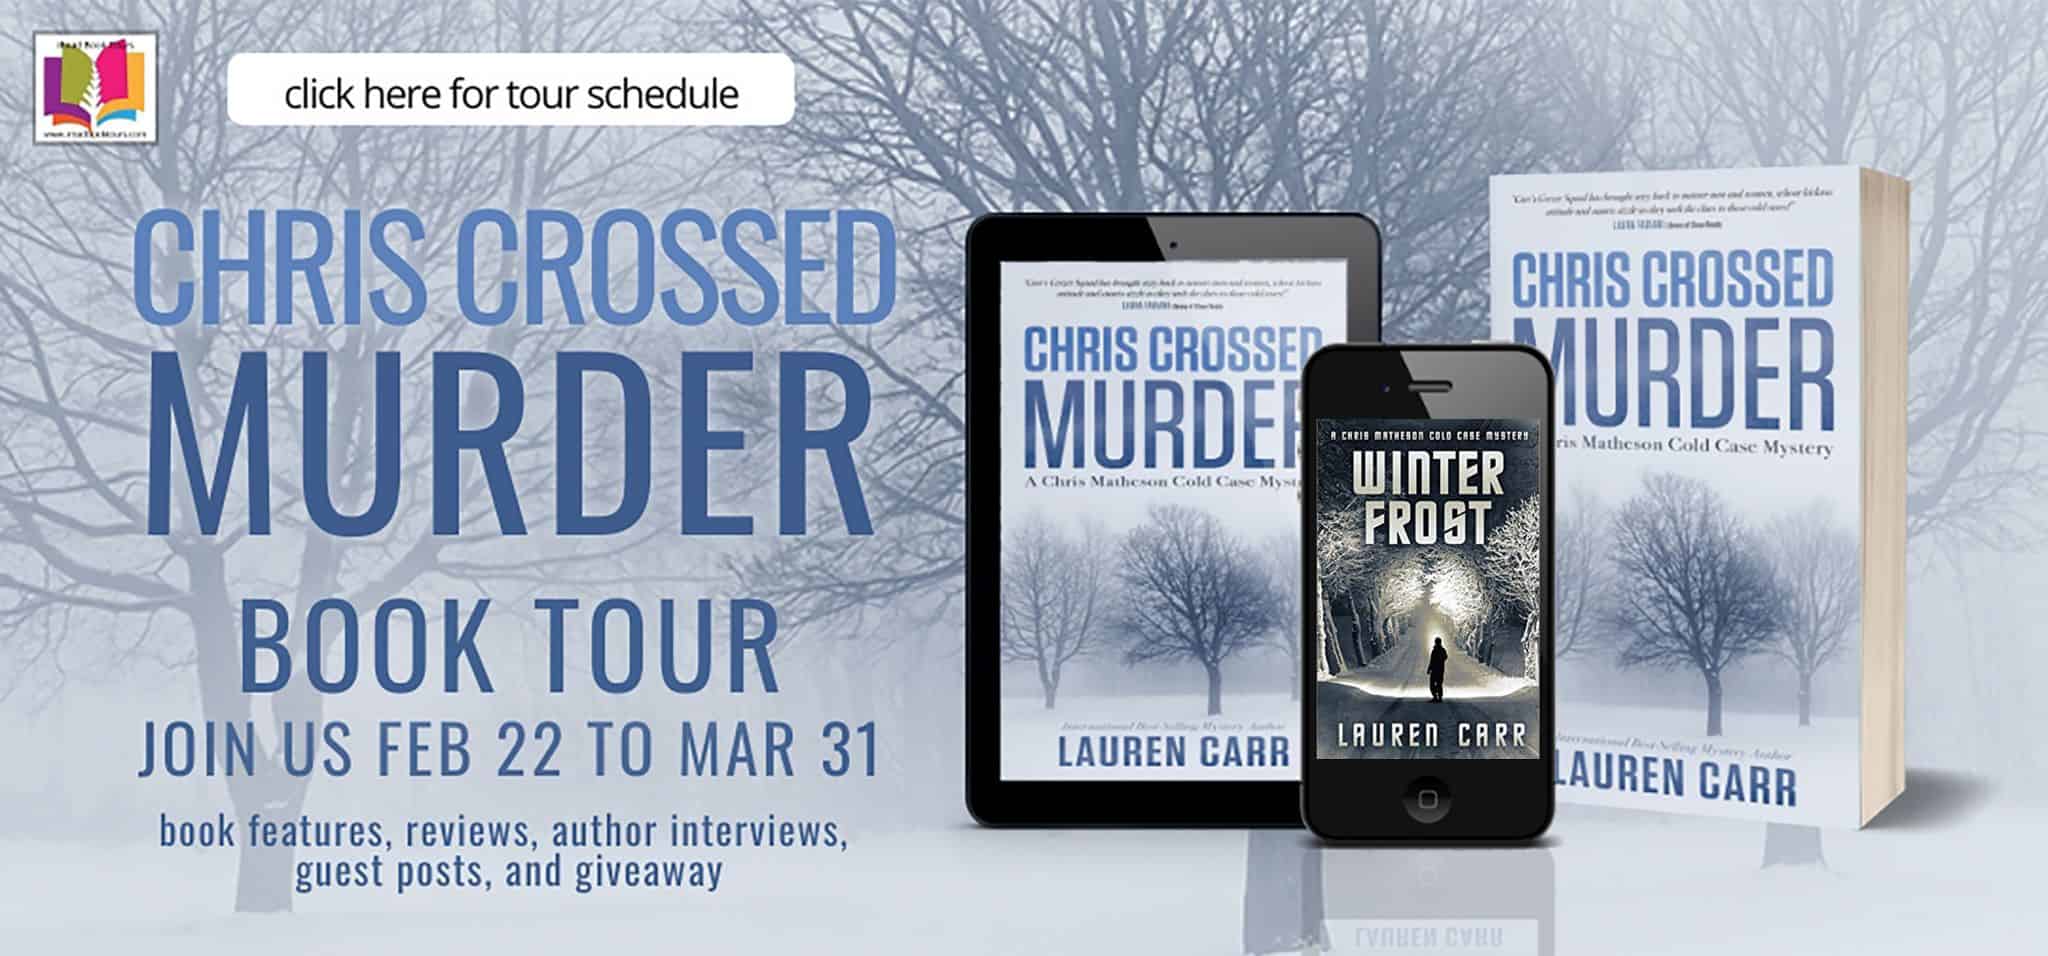 Winter Frost (A Chris Matheson Cold Case Mystery #2) by Lauren Carr | Series Blog Tour ~ Book Review ~ Giveaway